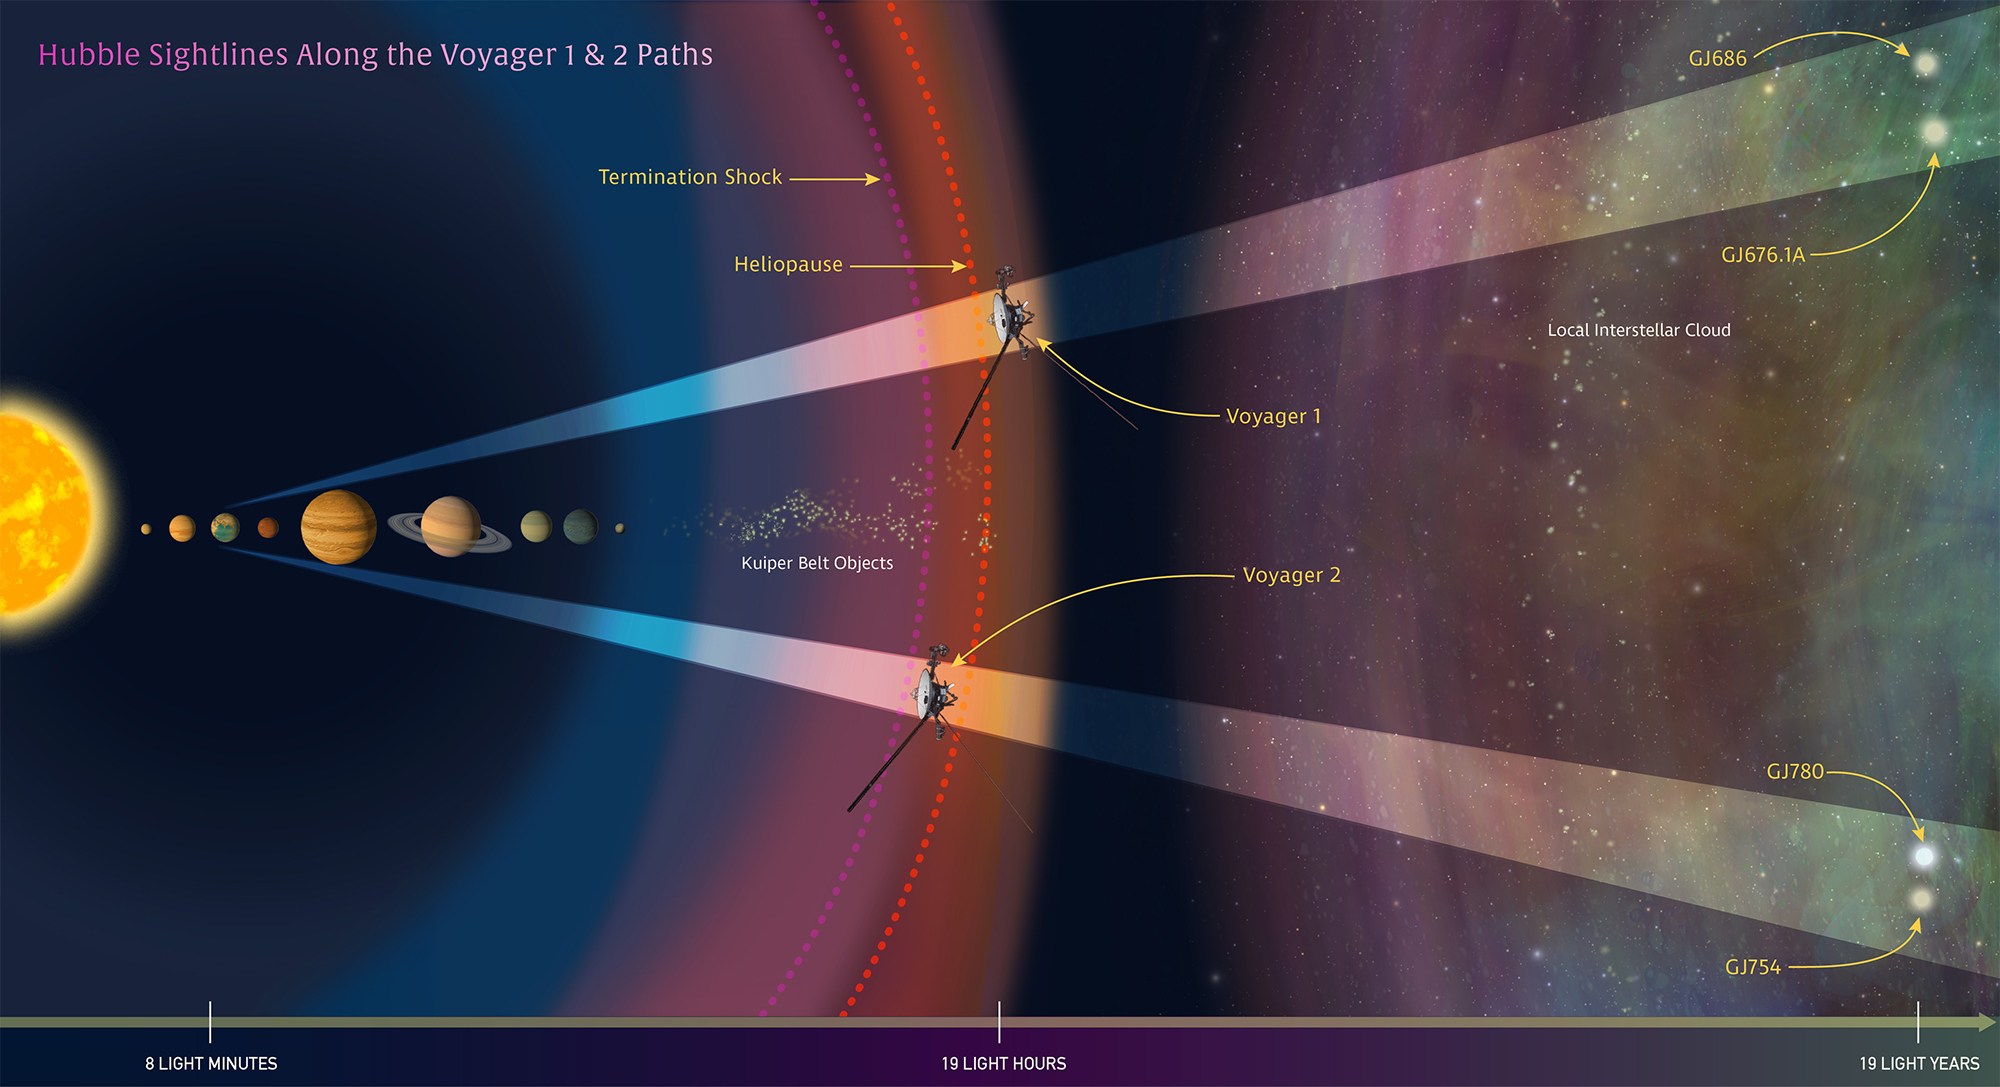 Hubble provides interstellar road map for Voyager probes